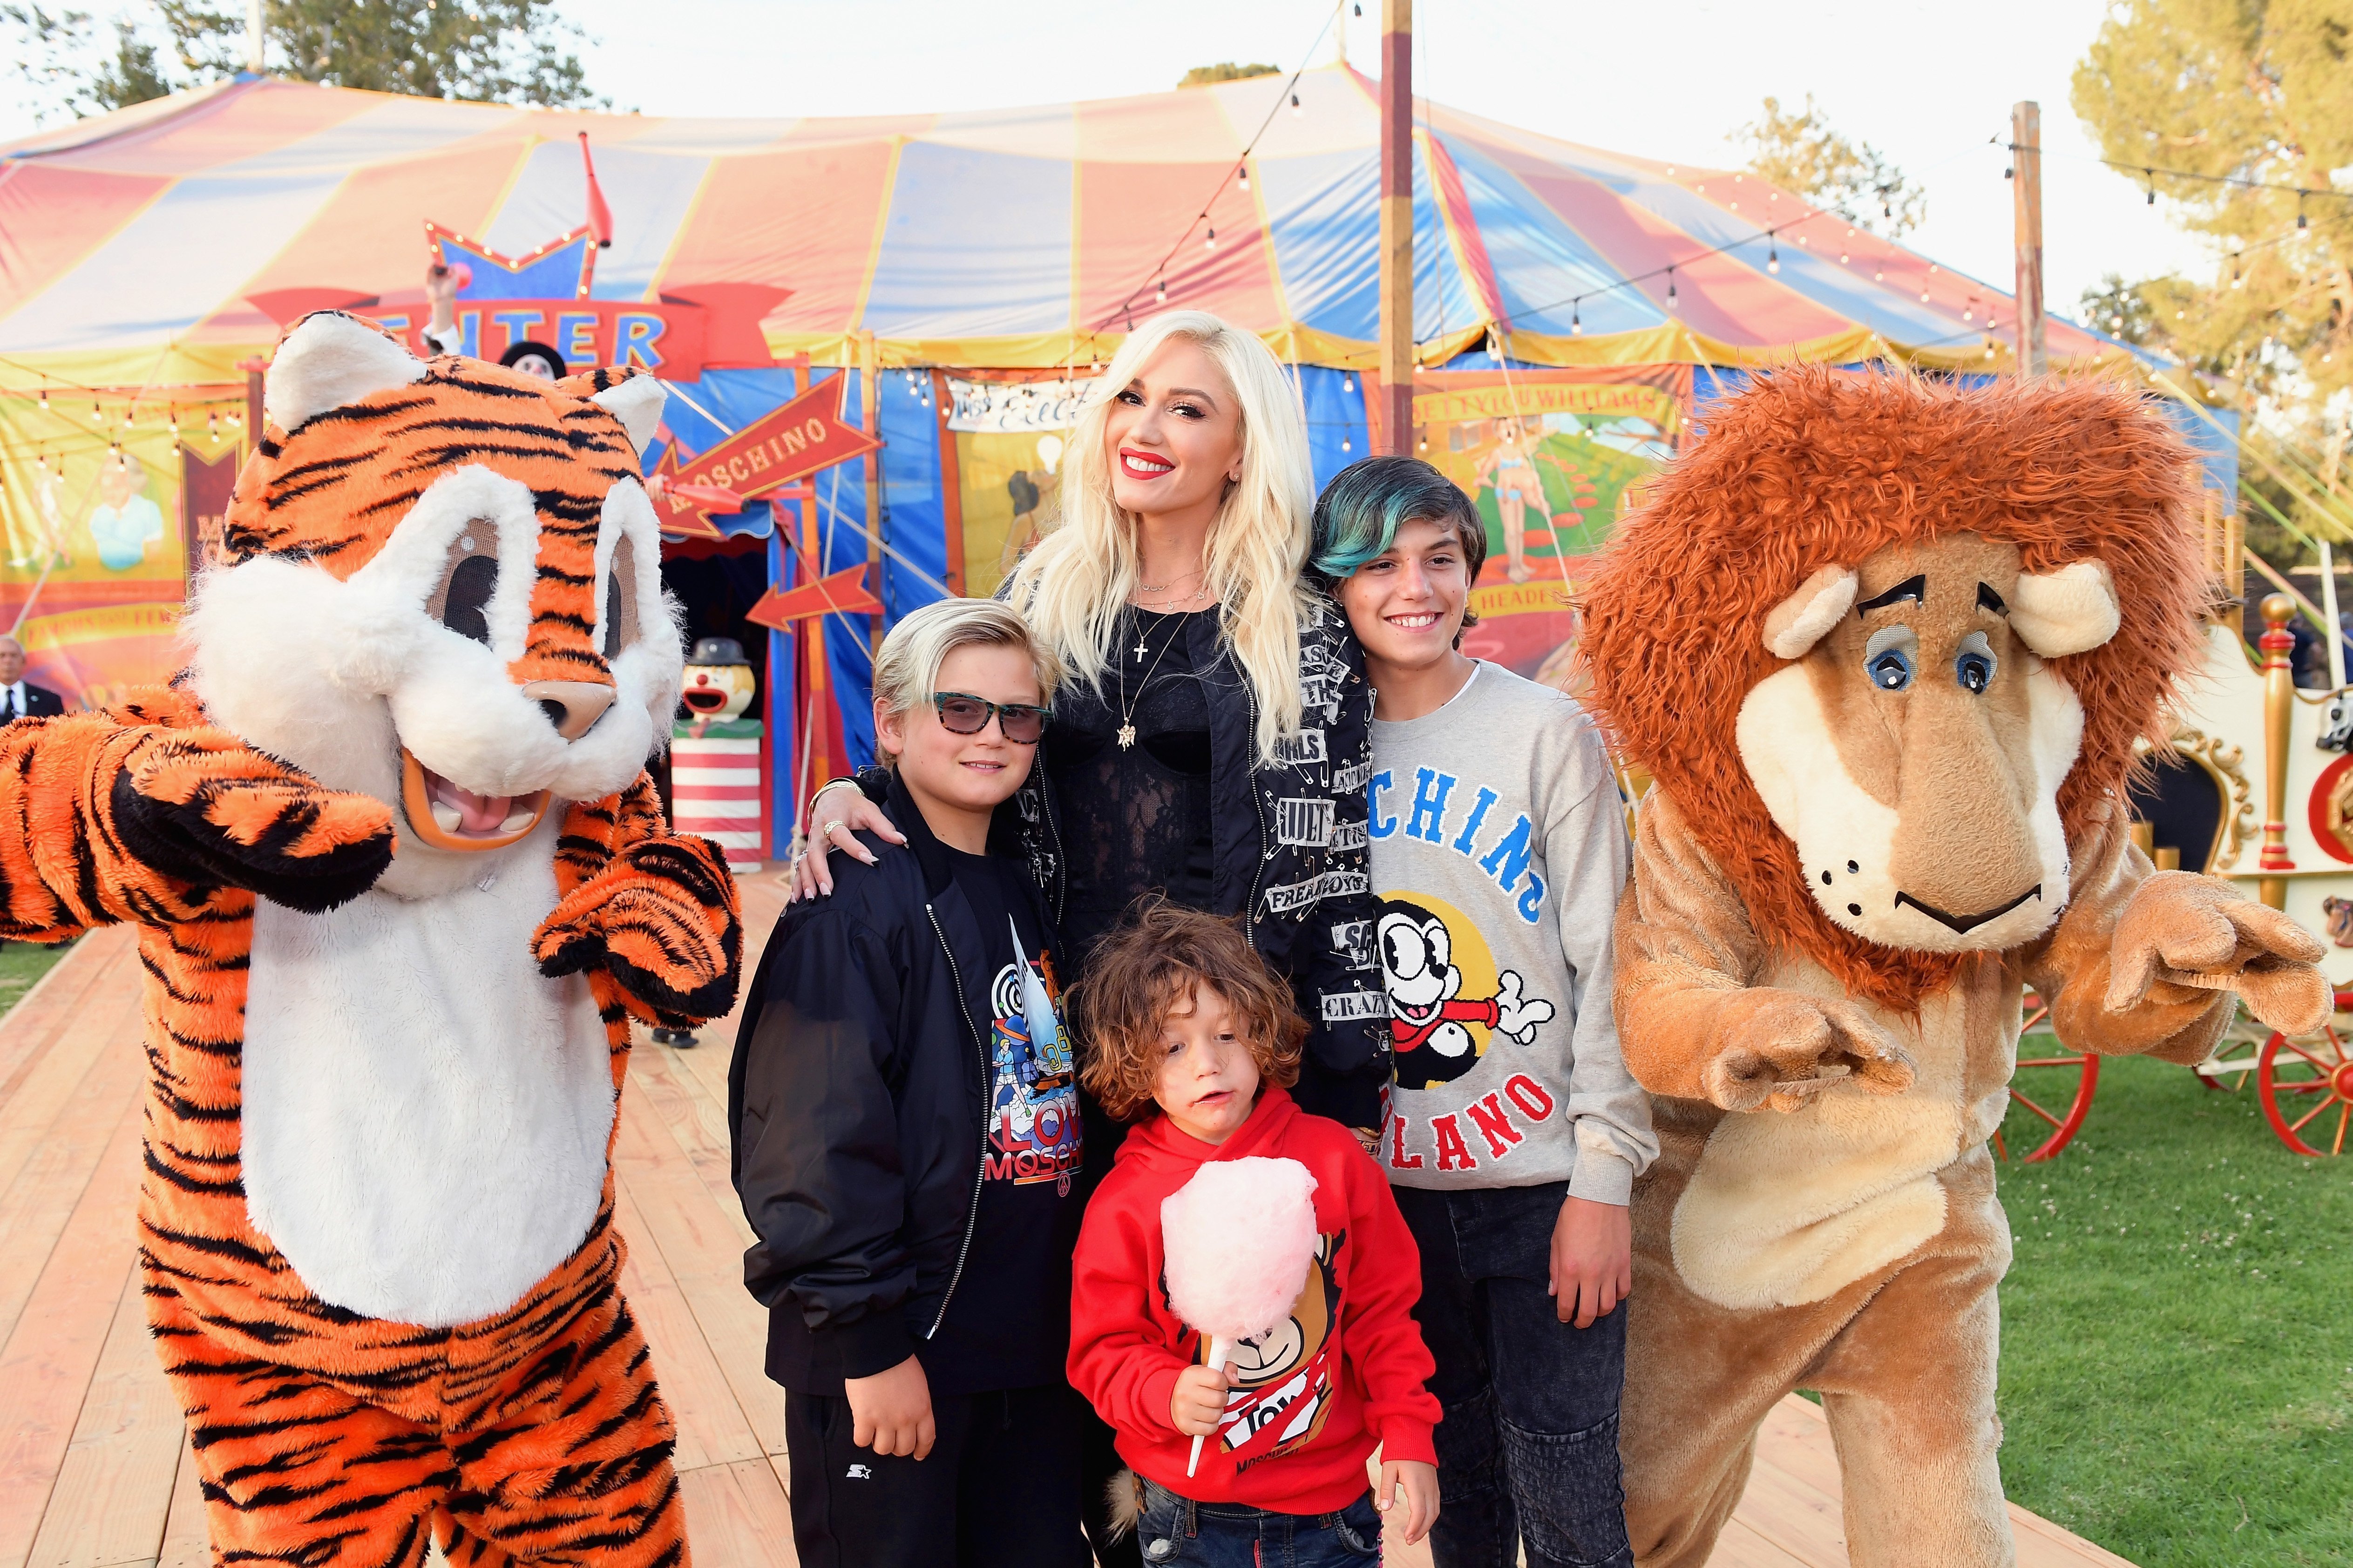 Gwen Stefani with sons Zuma, Apollo, and Kingston Rossdale at the Moschino Spring/Summer 19 Menswear and Women's Resort Collection on June 8, 2018, in Burbank, California | Photo: Matt Winkelmeyer/Getty Images